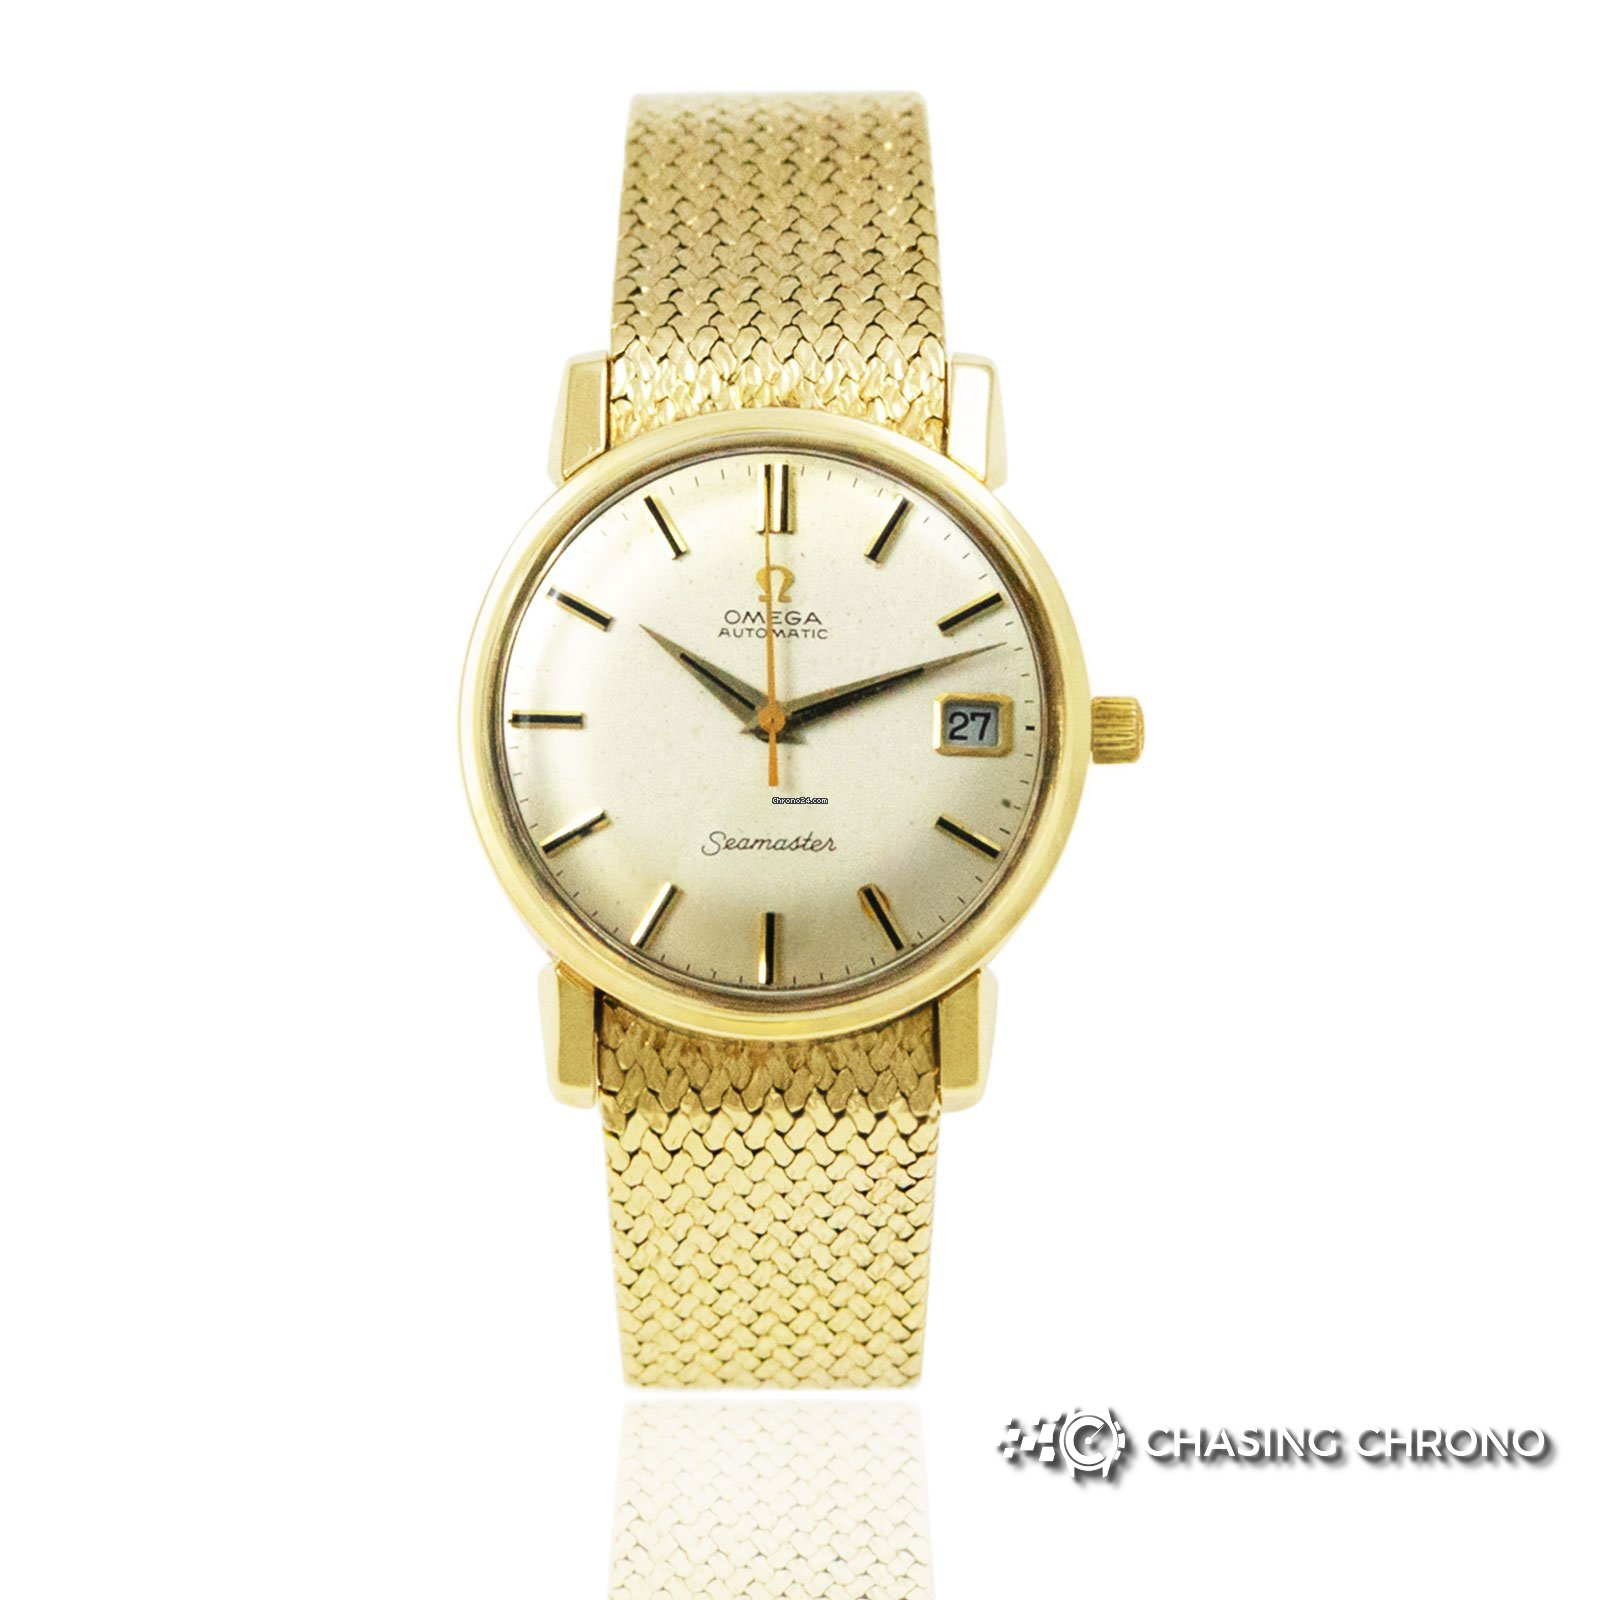 gold omega watch 1960's